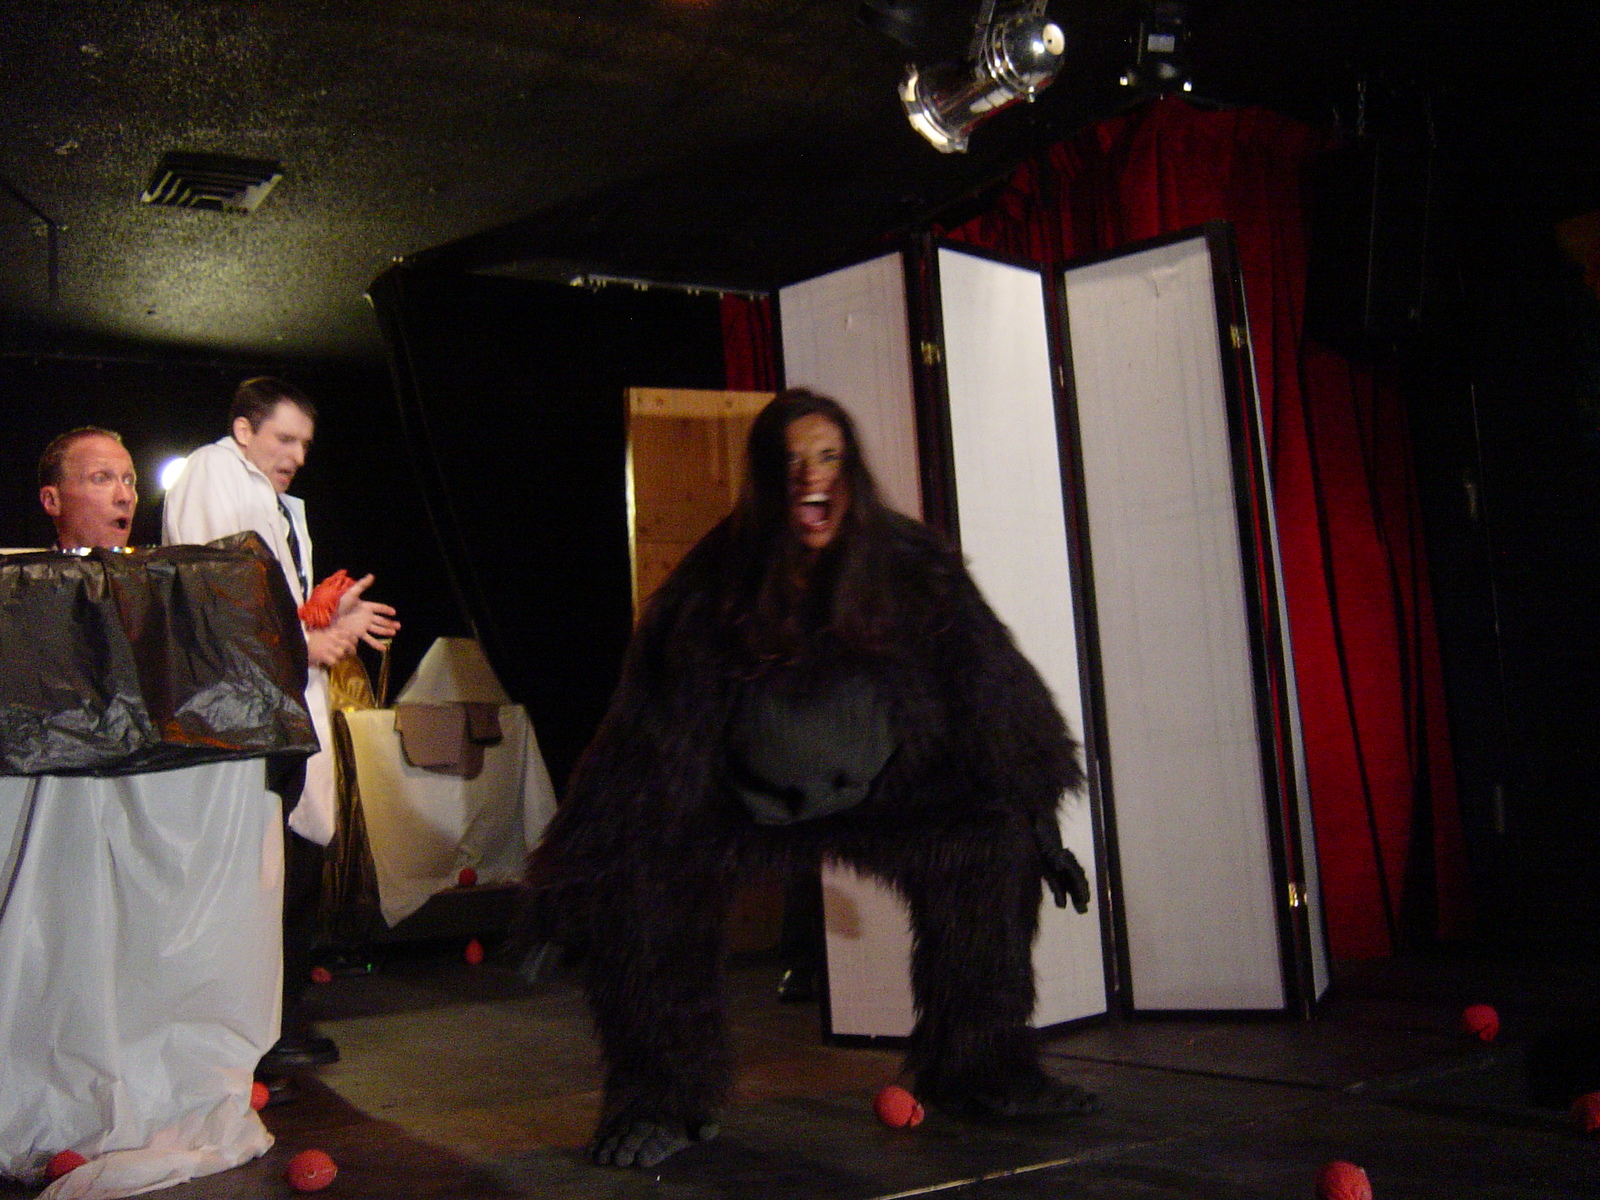 Bad Head show at The BoxOffice Theater where Rose Hill, performed as Felicia Burns, whose body is transplanted into a gorilla body.